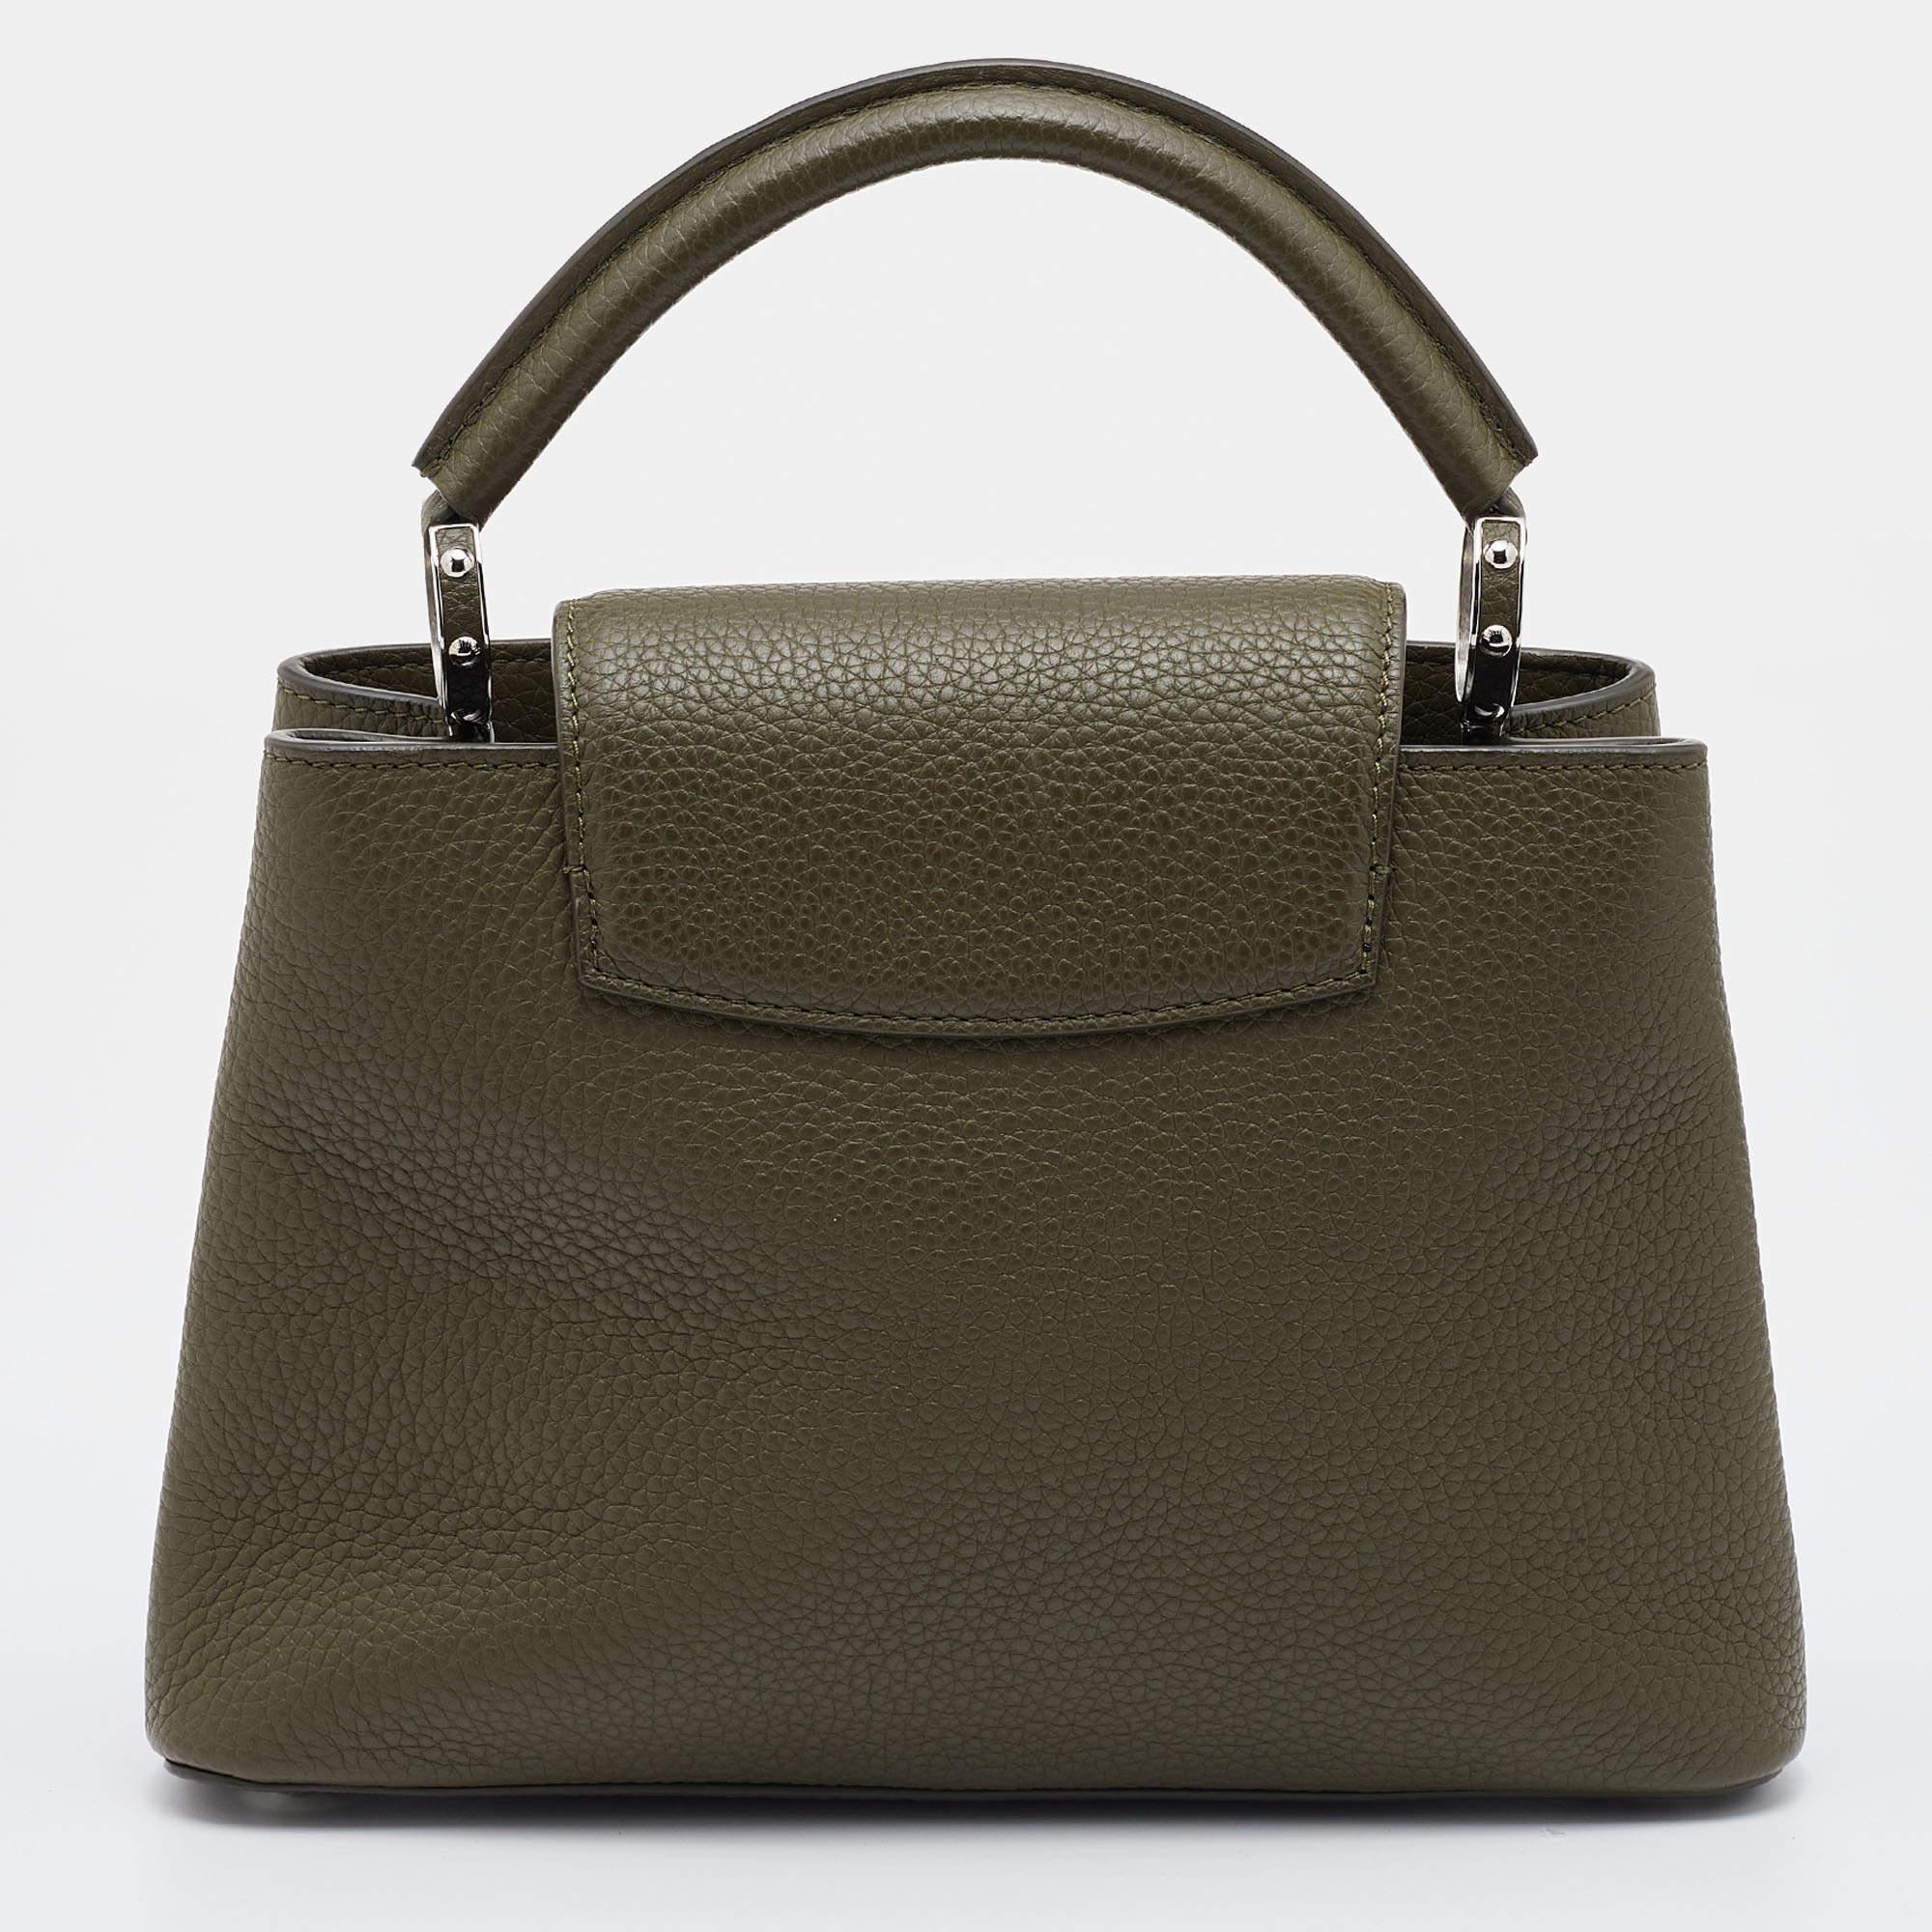 Crafted from leather, this LV Capucines BB features a structured design with a single handle and protective metal feet. While the front LV elevates its beauty, the leather interior will dutifully hold all your daily essentials.

Includes: Original